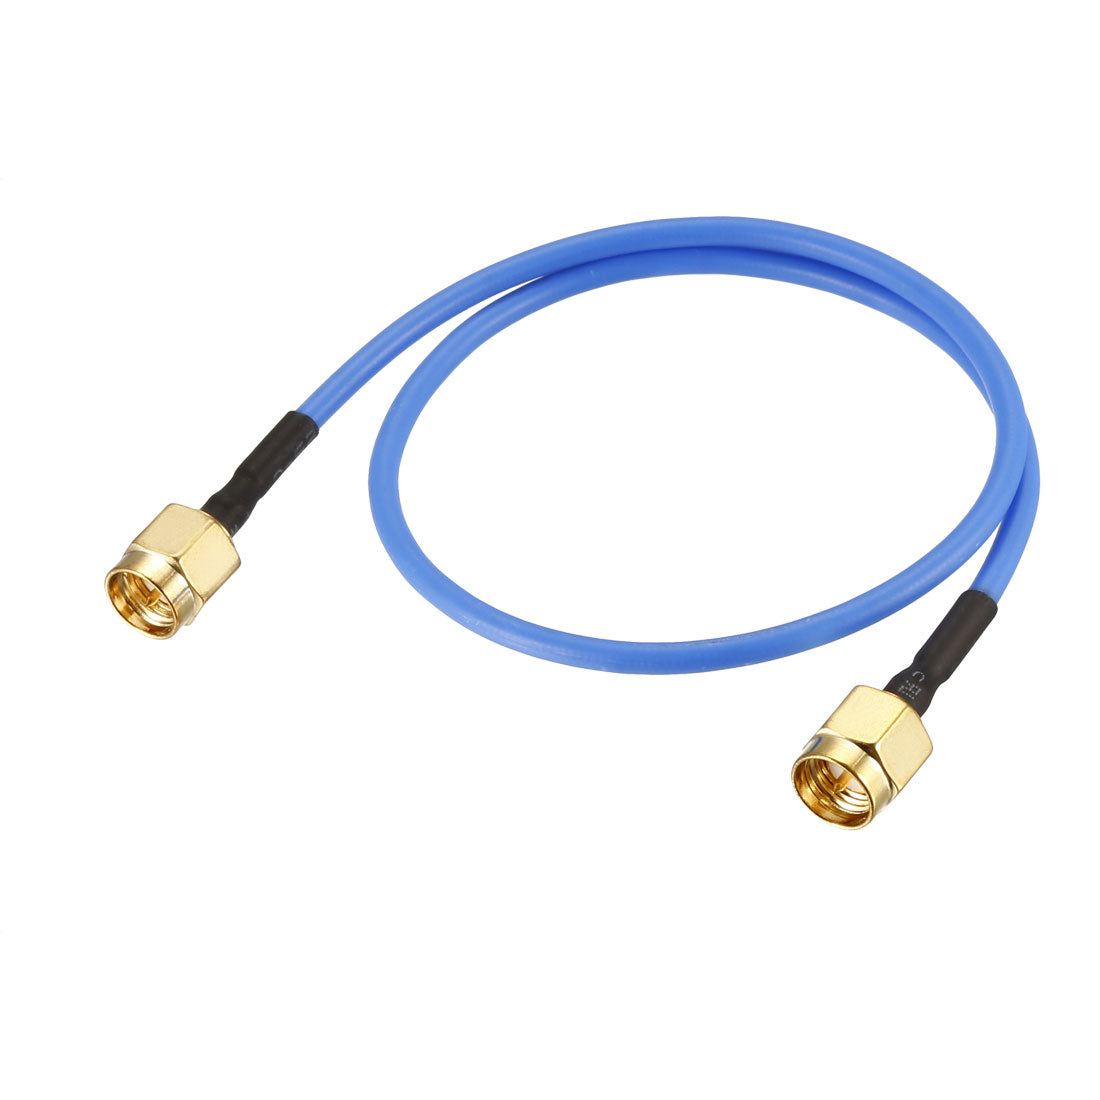 Uxcell Uxcell SMA Male to SMA Male Coaxial Cable 50 Ohm 0.9M/2.95Ft RG405